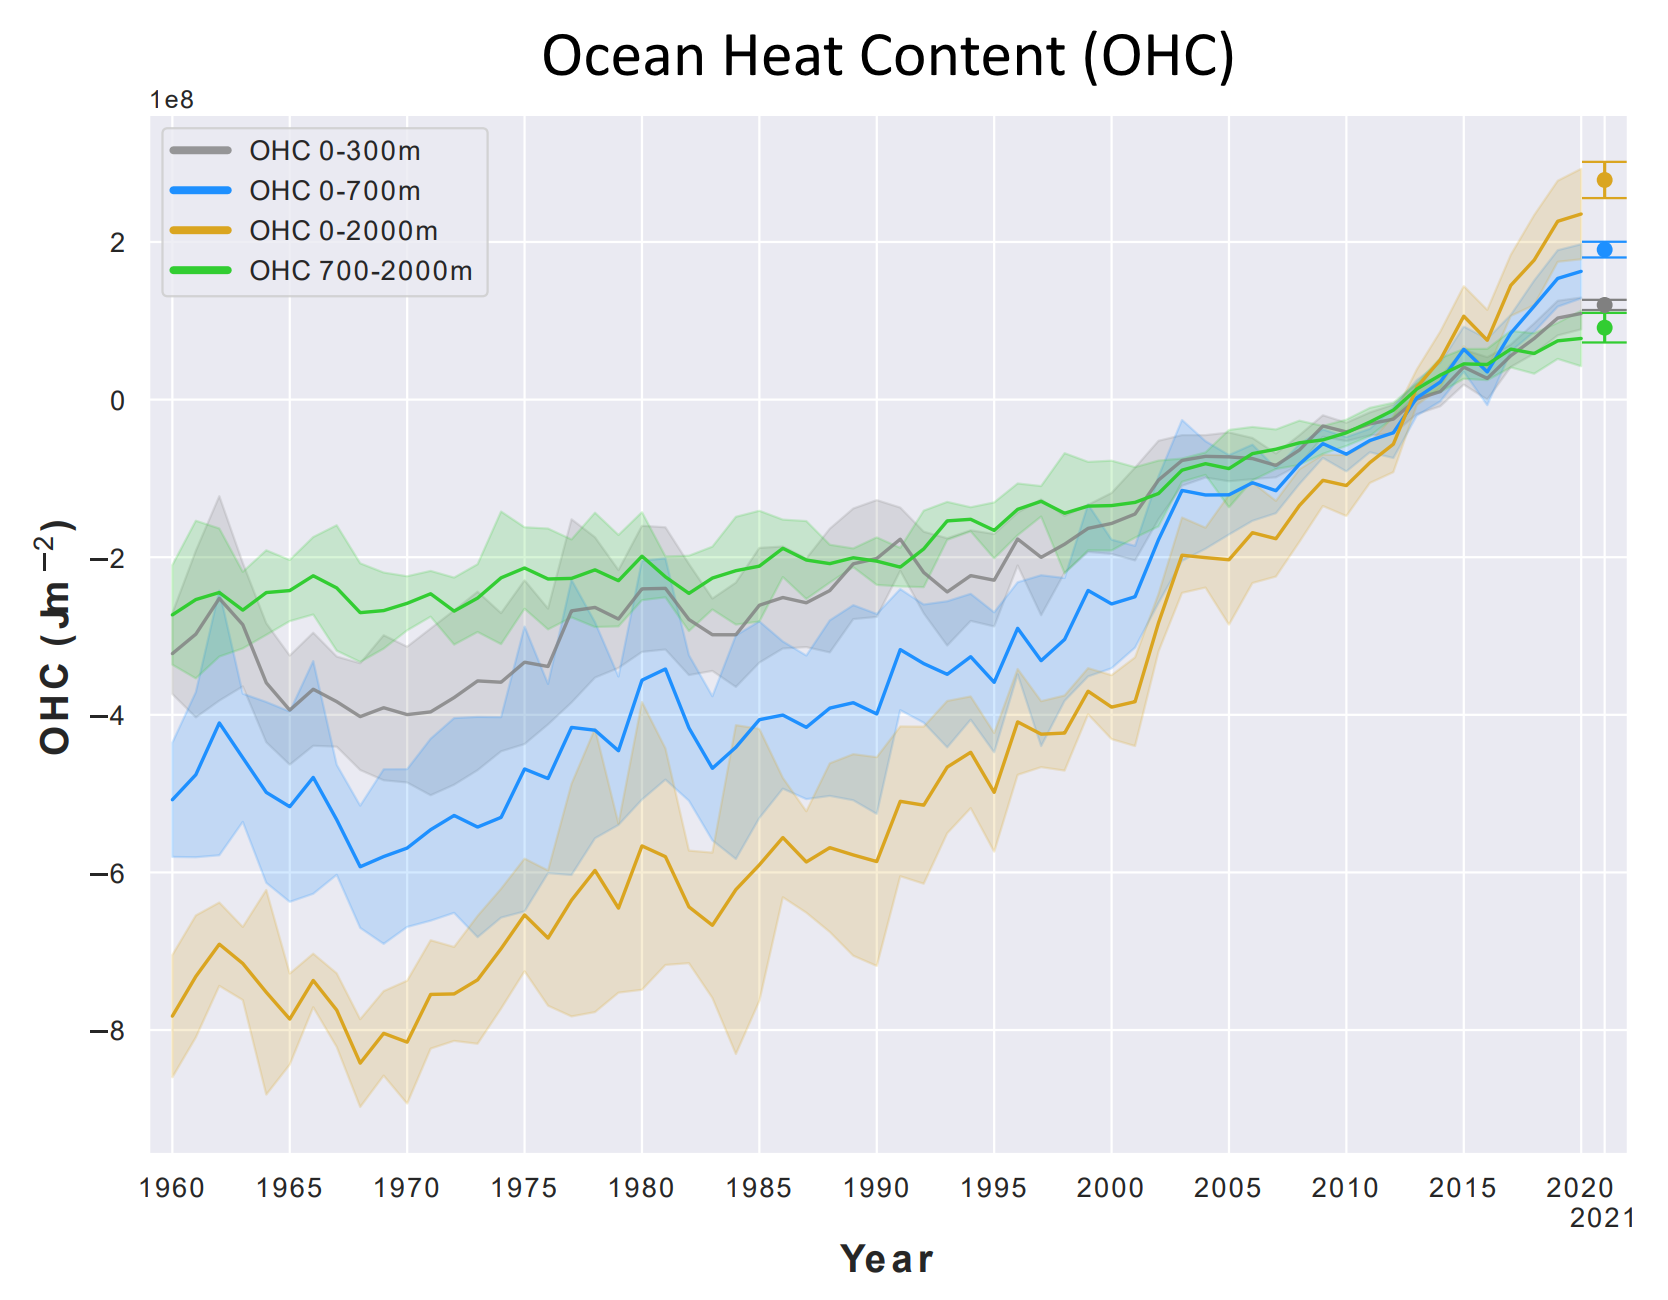 Ocean heat content, 1960-2021. The 1960-2021 ensemble mean time series and ensemble standard deviation (2-standard deviations, shaded) of global ocean heat content (OHC) anomalies relative to the 2005-2017 average for the 0-300m (grey), 0-700m (blue), 0-2000m (yellow) and 700-2000m depth layer (green). The upper 2000m of the ocean continued to warm in 2021 (the latest year for which consolidated figures are available) and it is expected that it will continue to warm in the future – a change which is irreversible on centennial to millennial time scales. The ocean heat content in 2021 was the highest on record, exceeding the 2020 value by 14 ± 9 ZJ. All data sets agree that ocean warming rates show a particularly strong increase in the past two decades. The rate of ocean warming for the 0-2000m layer was 0.6 ± 0.1 W·m-2 from 1971-2021, but 1.0 ± 0.1 W·m-2 from 2006-2021. The ensemble mean is an update of the outcome of a concerted international effort, and all products used are referenced in the section on Ocean heat content data. Note that values are given for the ocean surface area between 60°S-60°N and limited to areas deeper than 300m in each product. The ensemble-mean OHC anomalies for the year 2021 has been added as separate points, together with their ensemble spread, and is based on the 4 products listed in Ocean heat content. Graphic: WMO